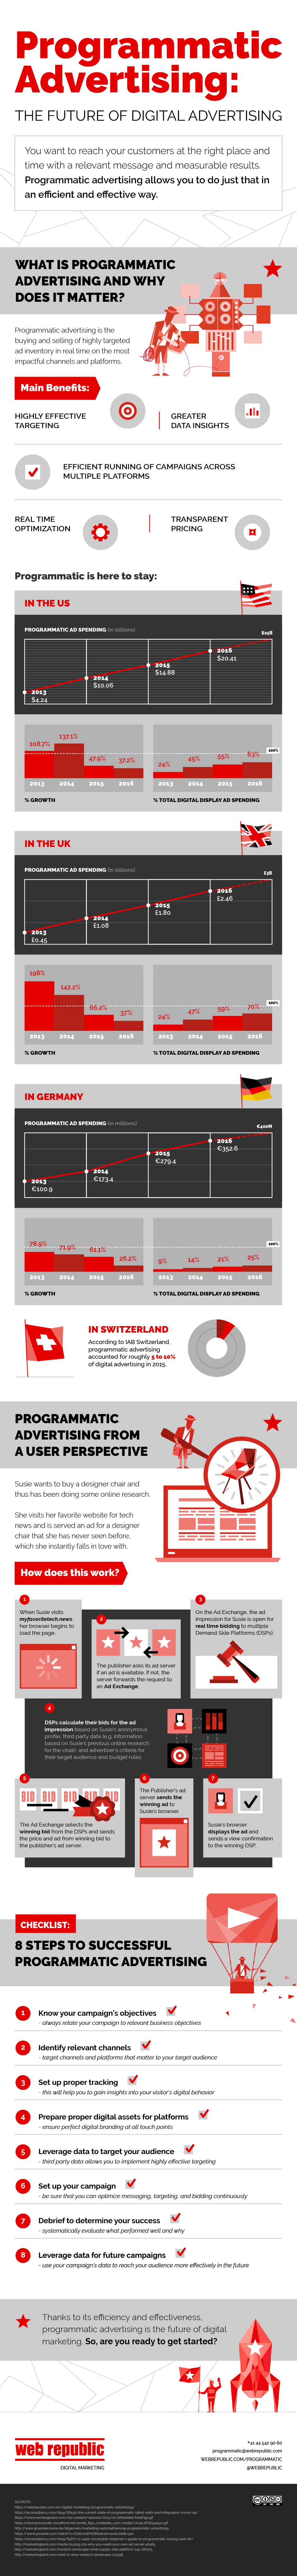 This infographic shows how programmatic advertising works and how marketers can benefit from it.